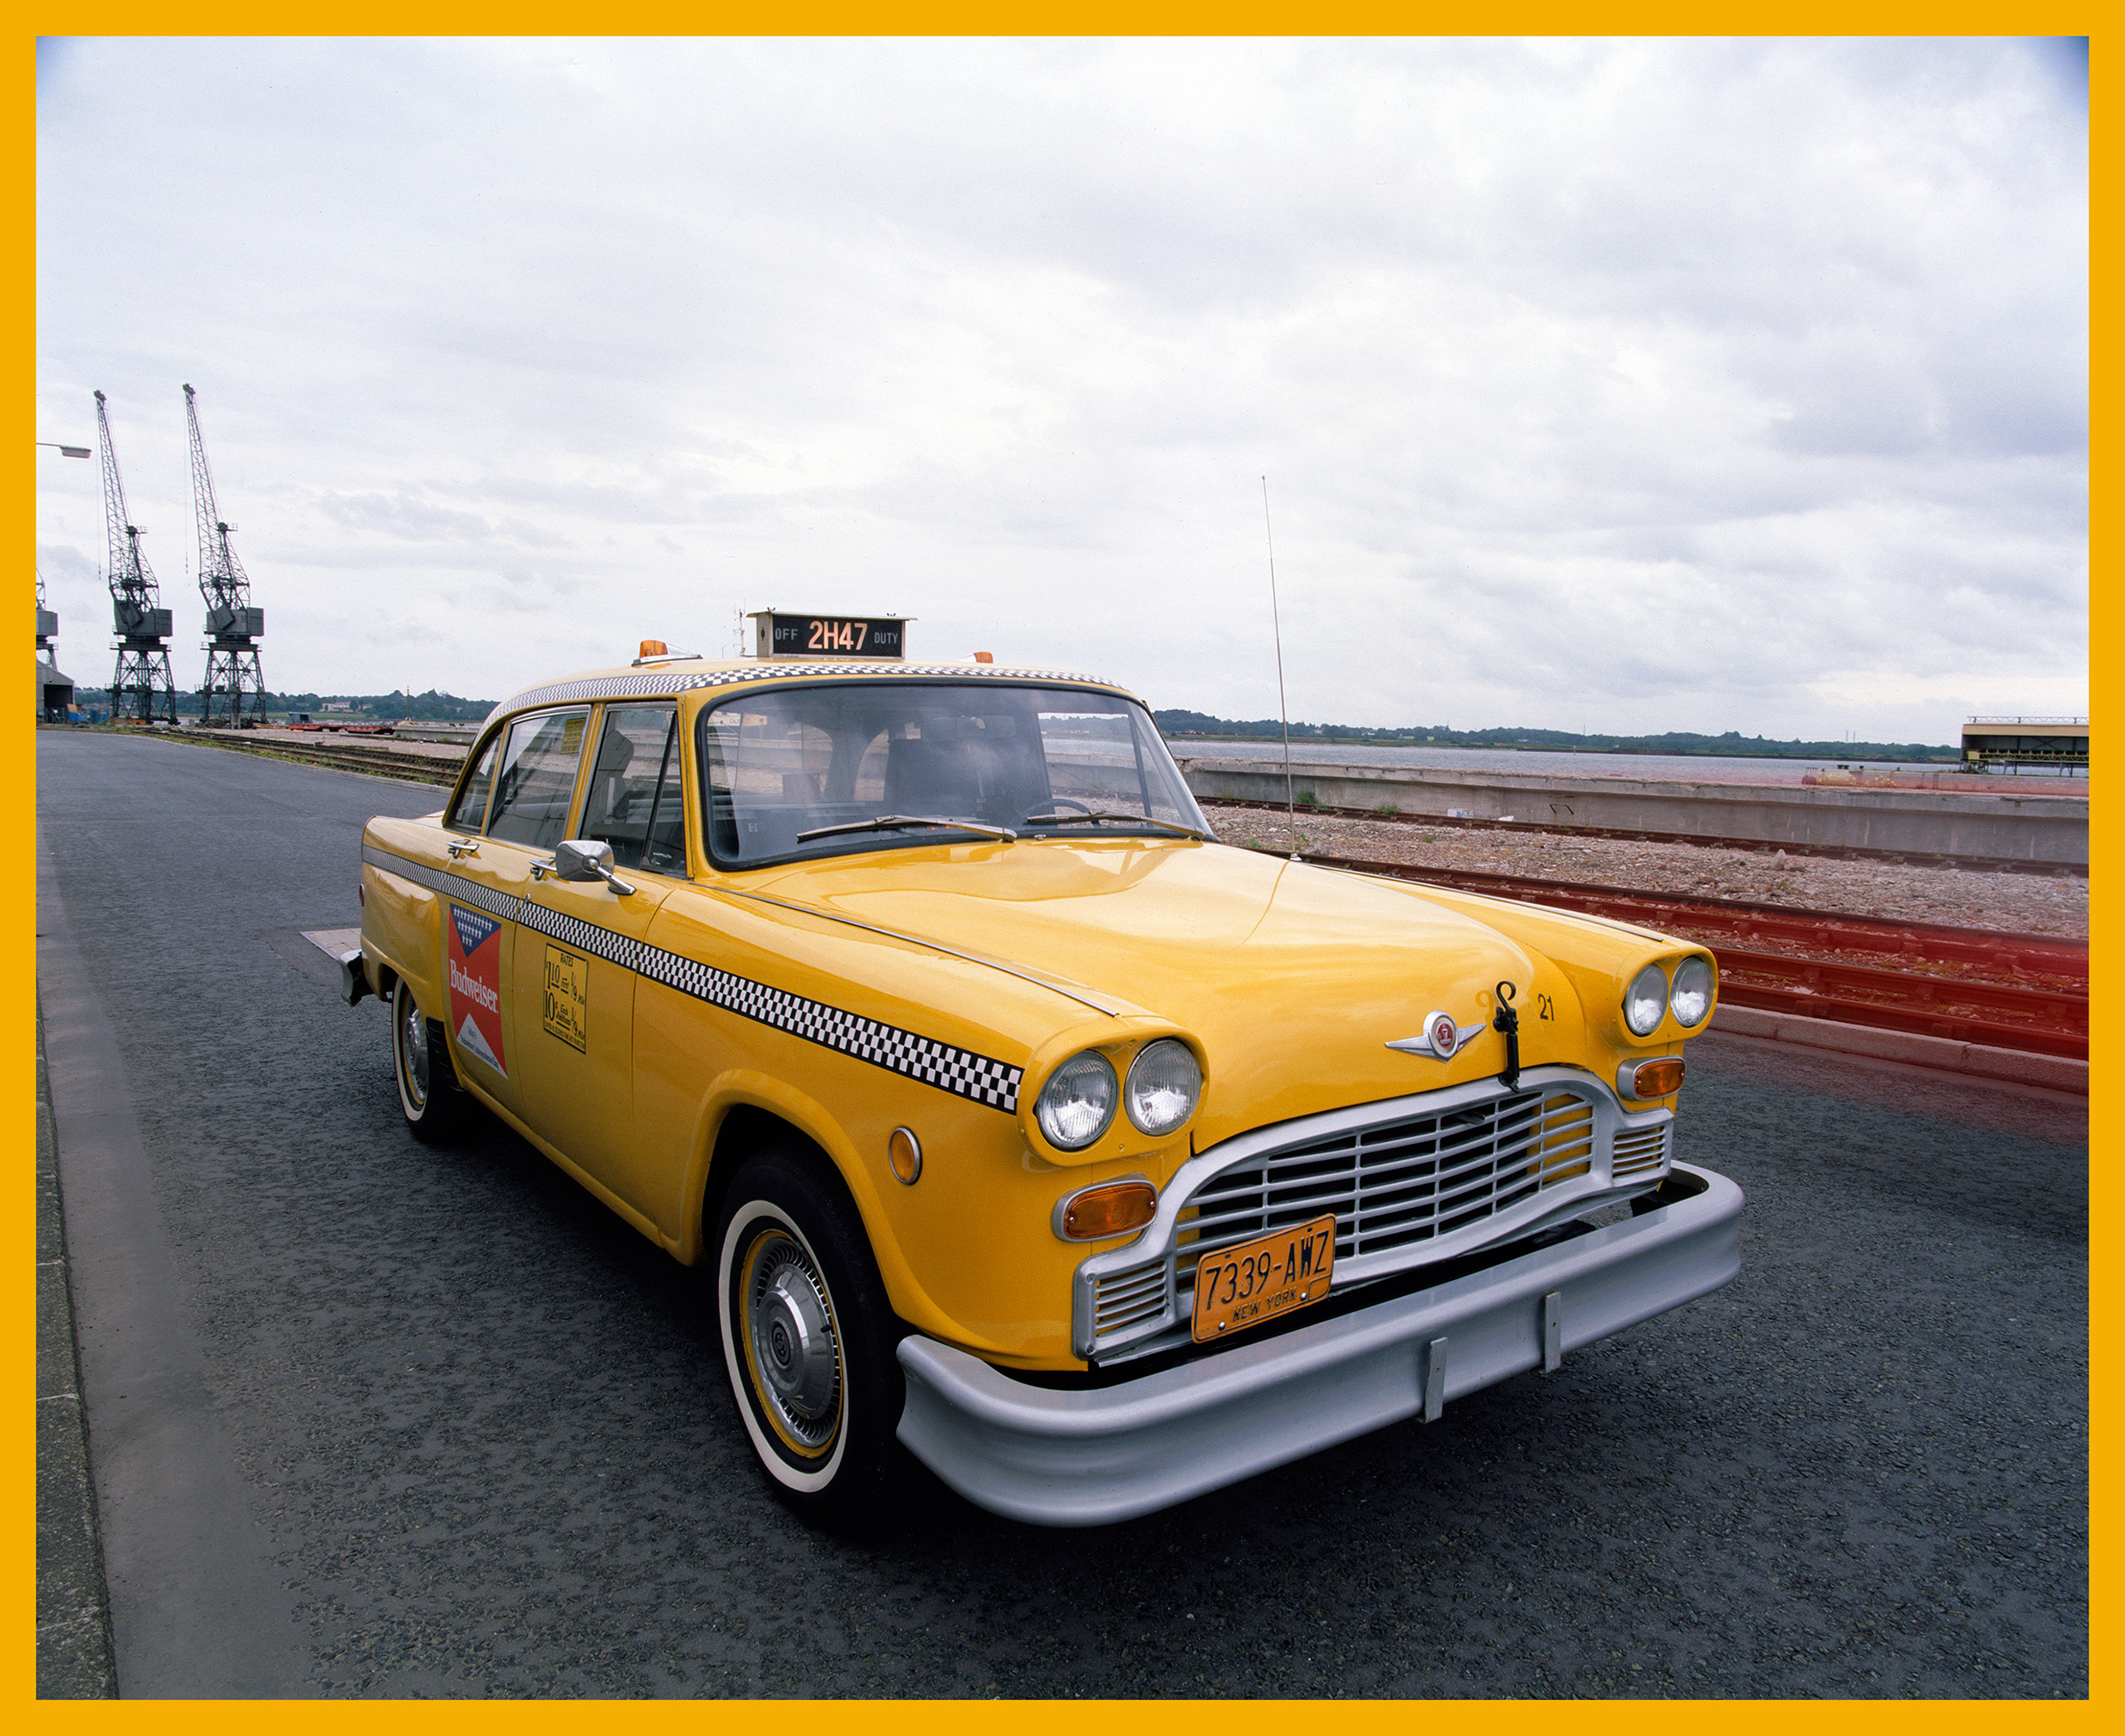 Checker A11 cab, 1980. (National Motor Museum/Heritage Images—Getty Images)